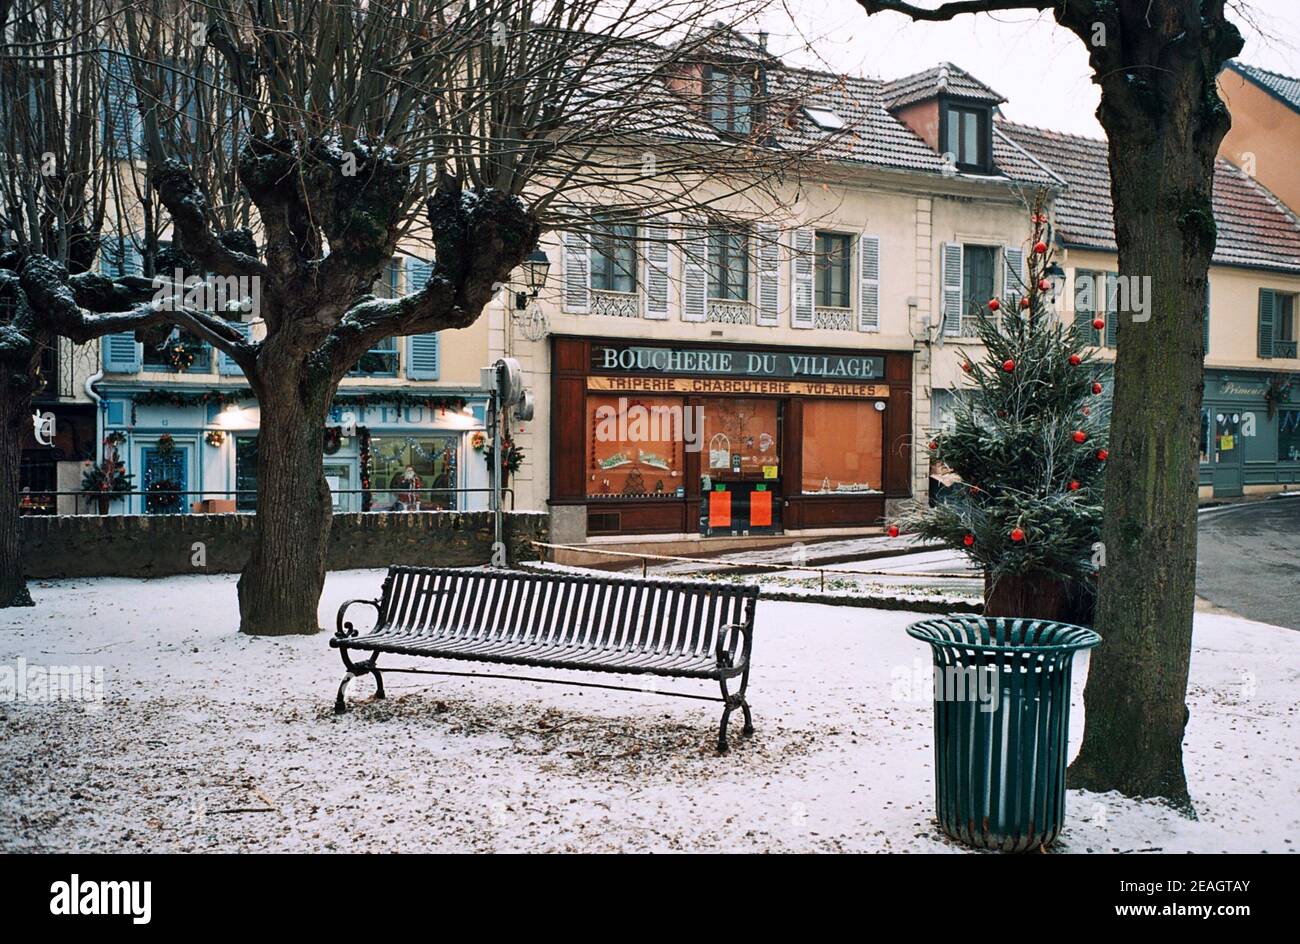 AJAXNETPHOTO.  LOUVECIENNES, FRANCE. - SNOWY CENTRE AT CHRISTMAS TIME; LOCATION FREQUENTED BY 19TH CENTURY ARTISTS INCLUDING CAMILLE PISSARRO AND ALFRED SISLEY.PHOTO:JONATHAN EASTLAND/AJAX REF:TC2587 21 20A Stock Photo